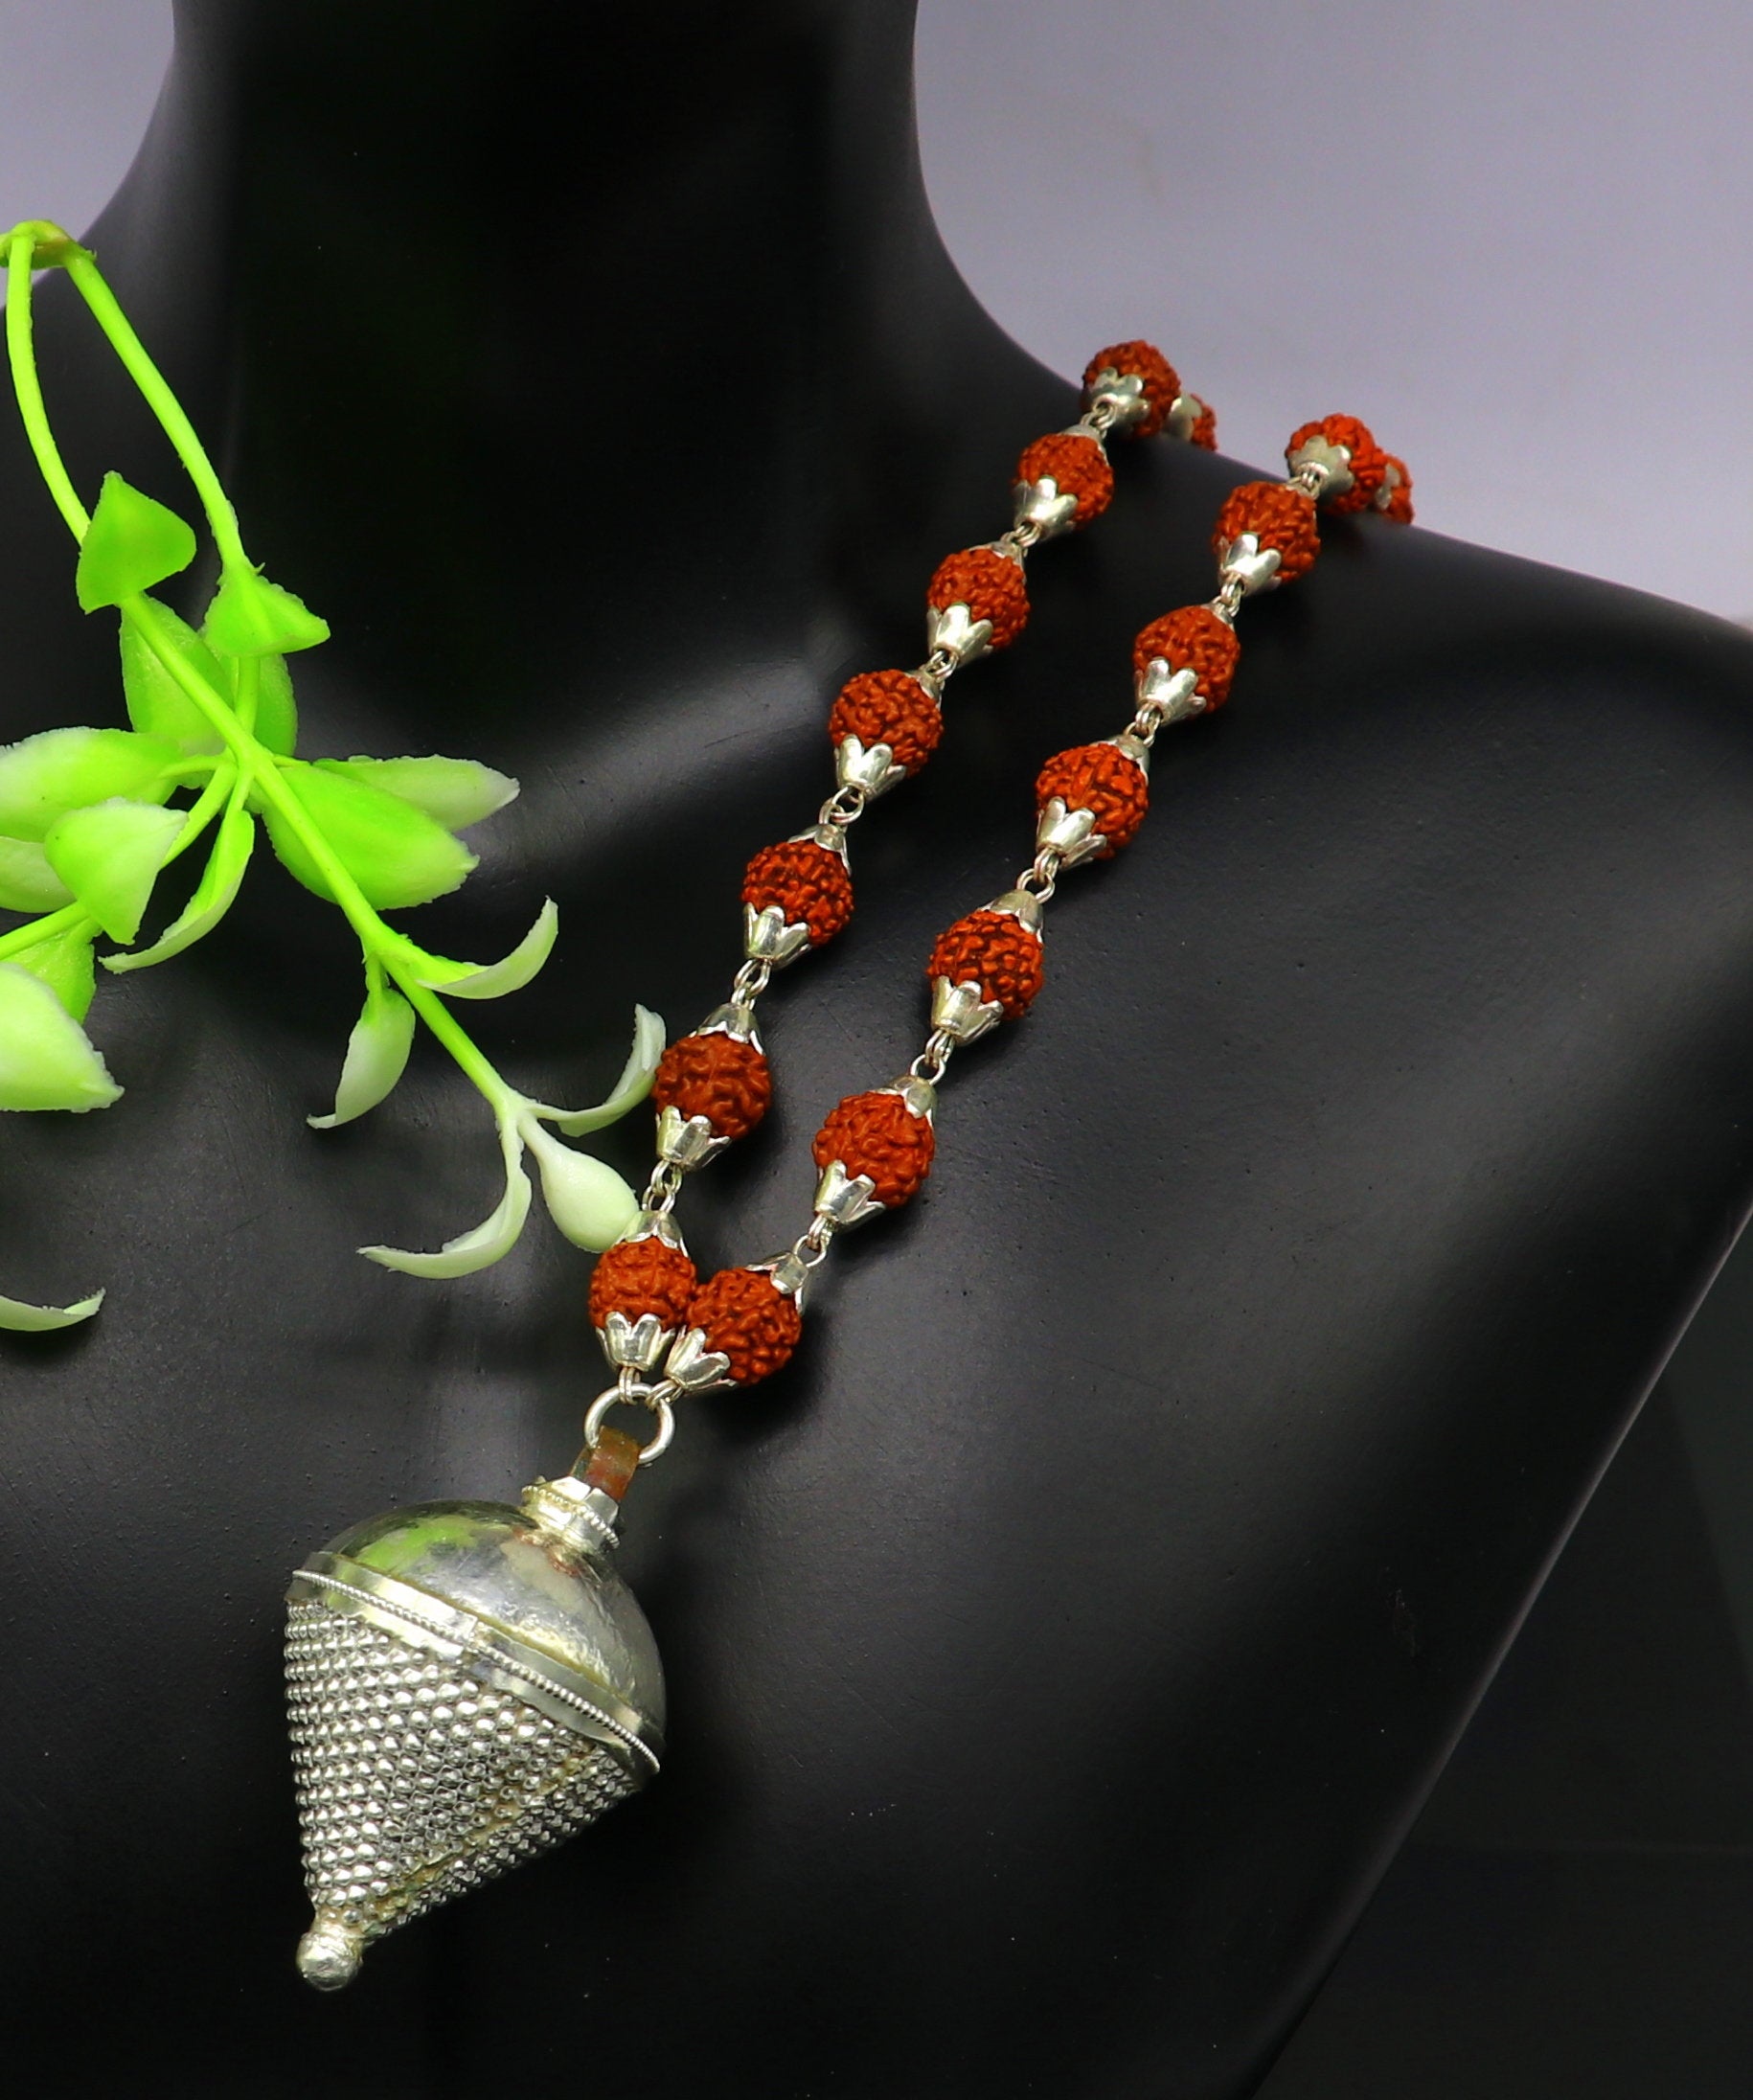 pure sterling silver custom made Rudraksha chain necklace, excellent hanging silver wax ball pendant, unique style gifting jewelry set147 - TRIBAL ORNAMENTS